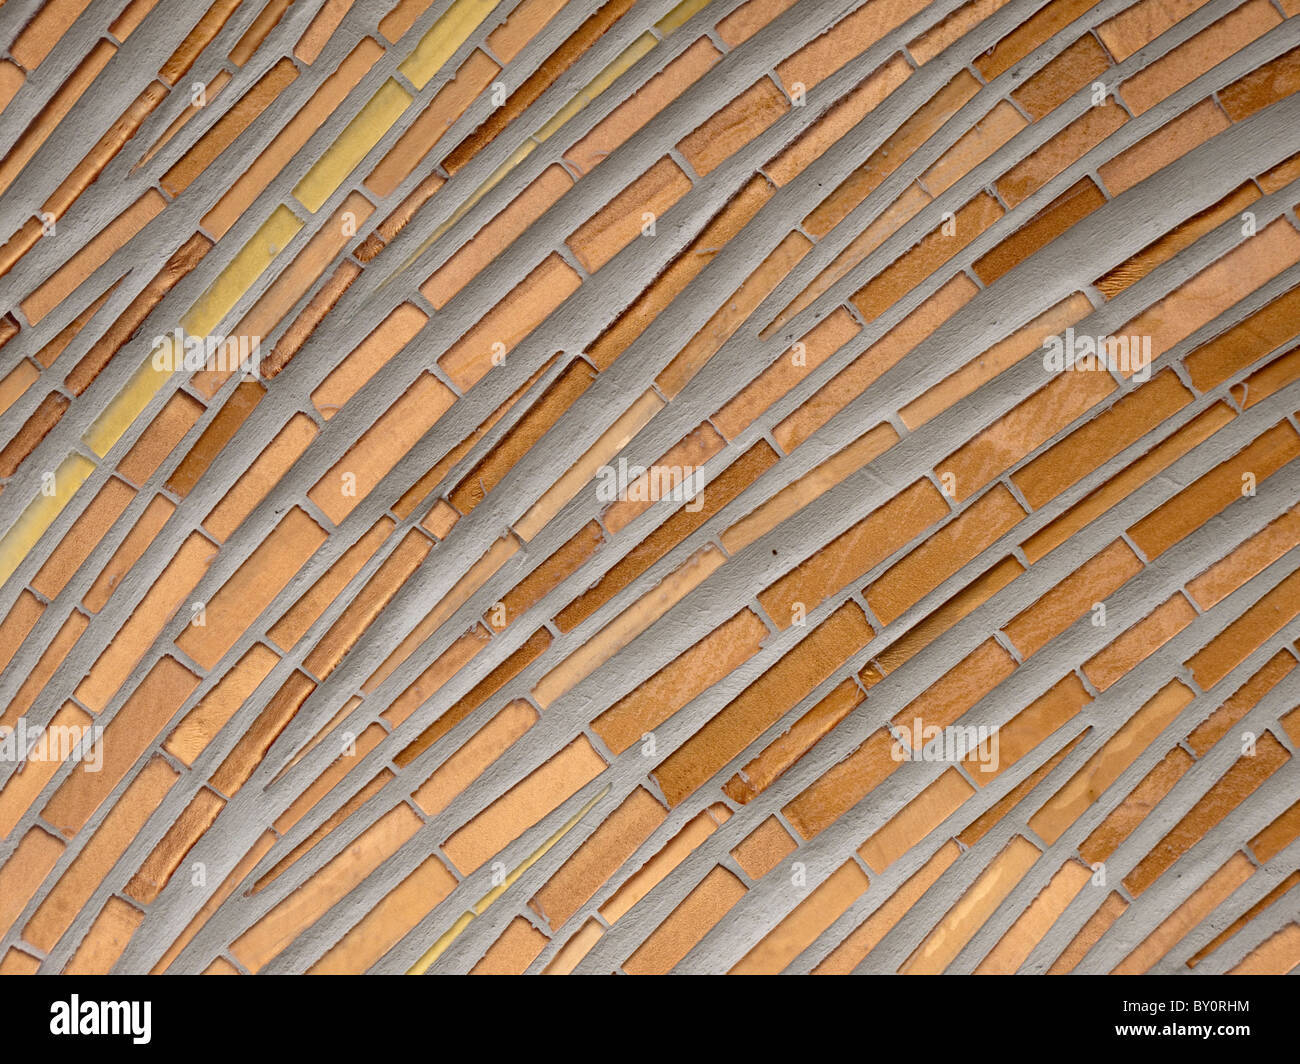 Mosaic tile pattern full frame background texture close up Stock Photo